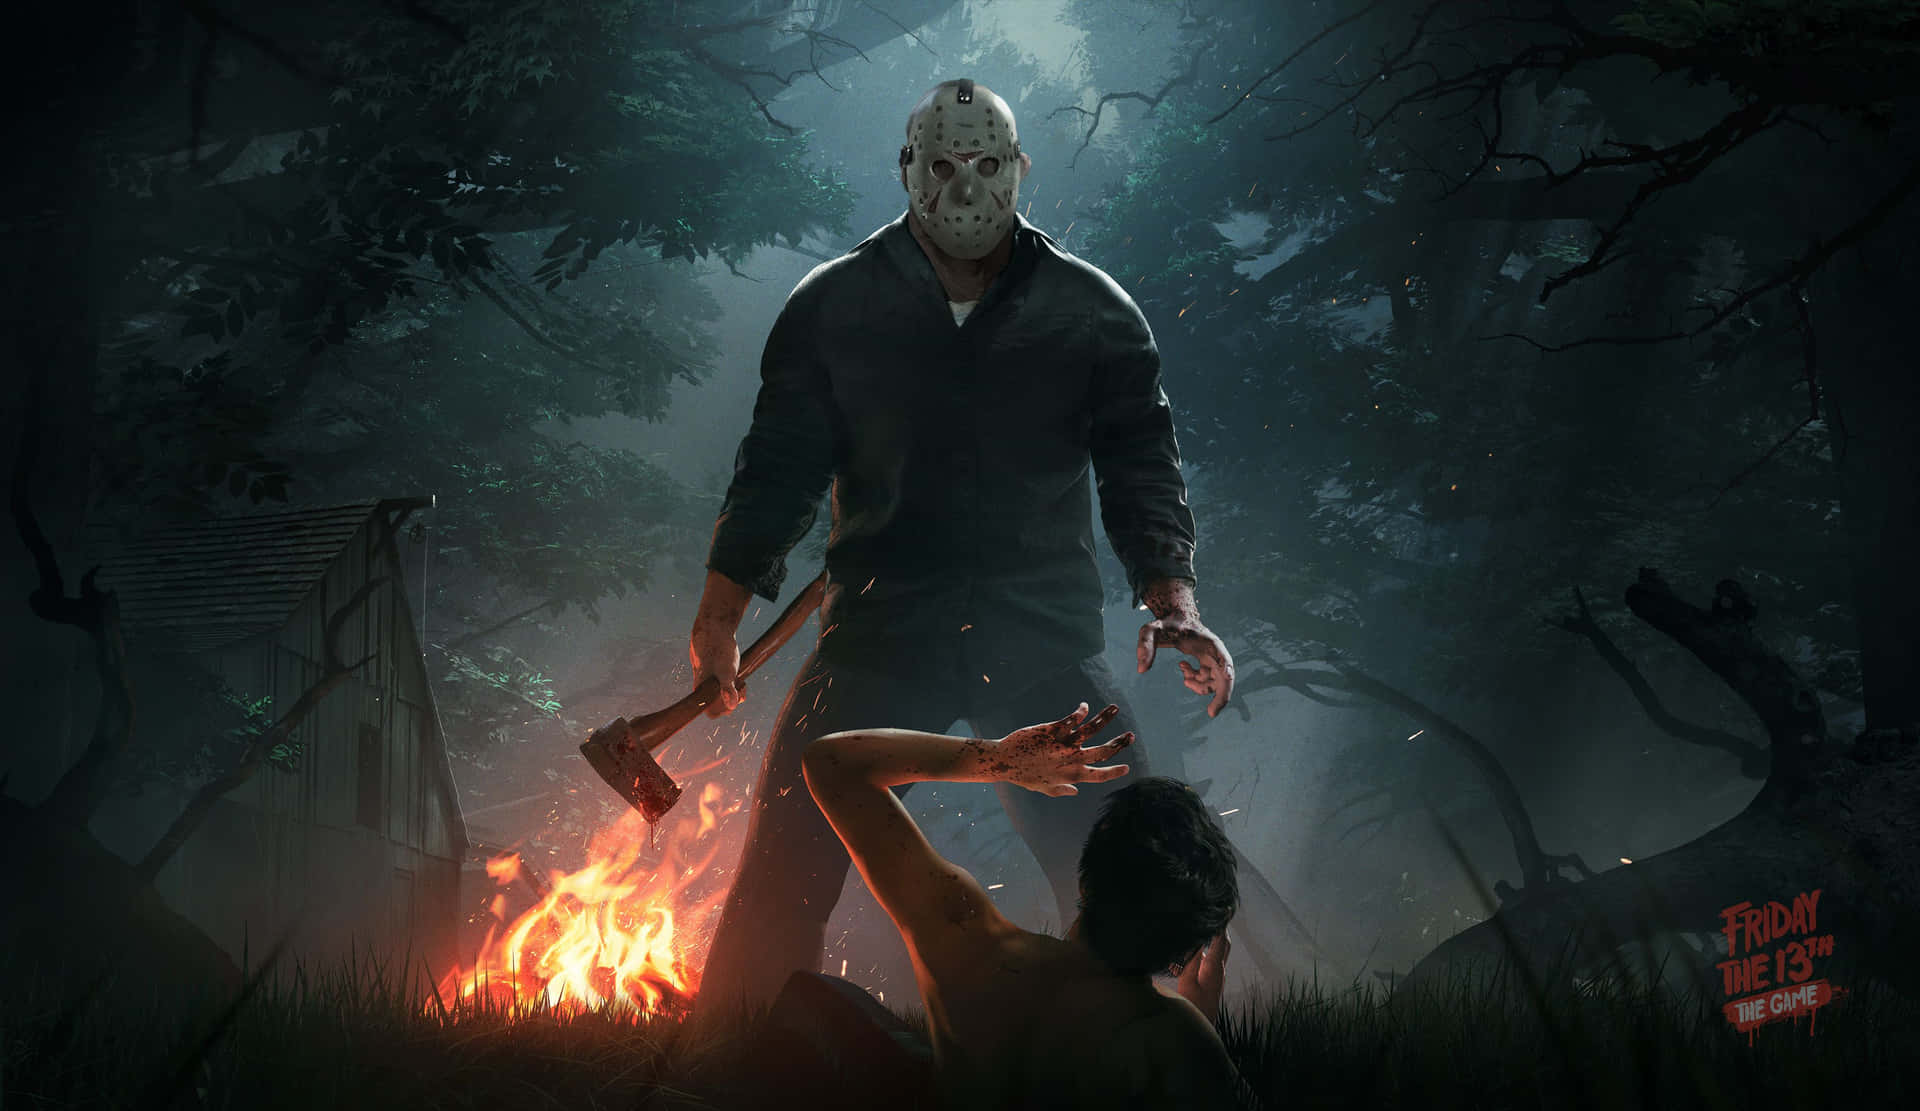 Spooky Friday The 13th landscape